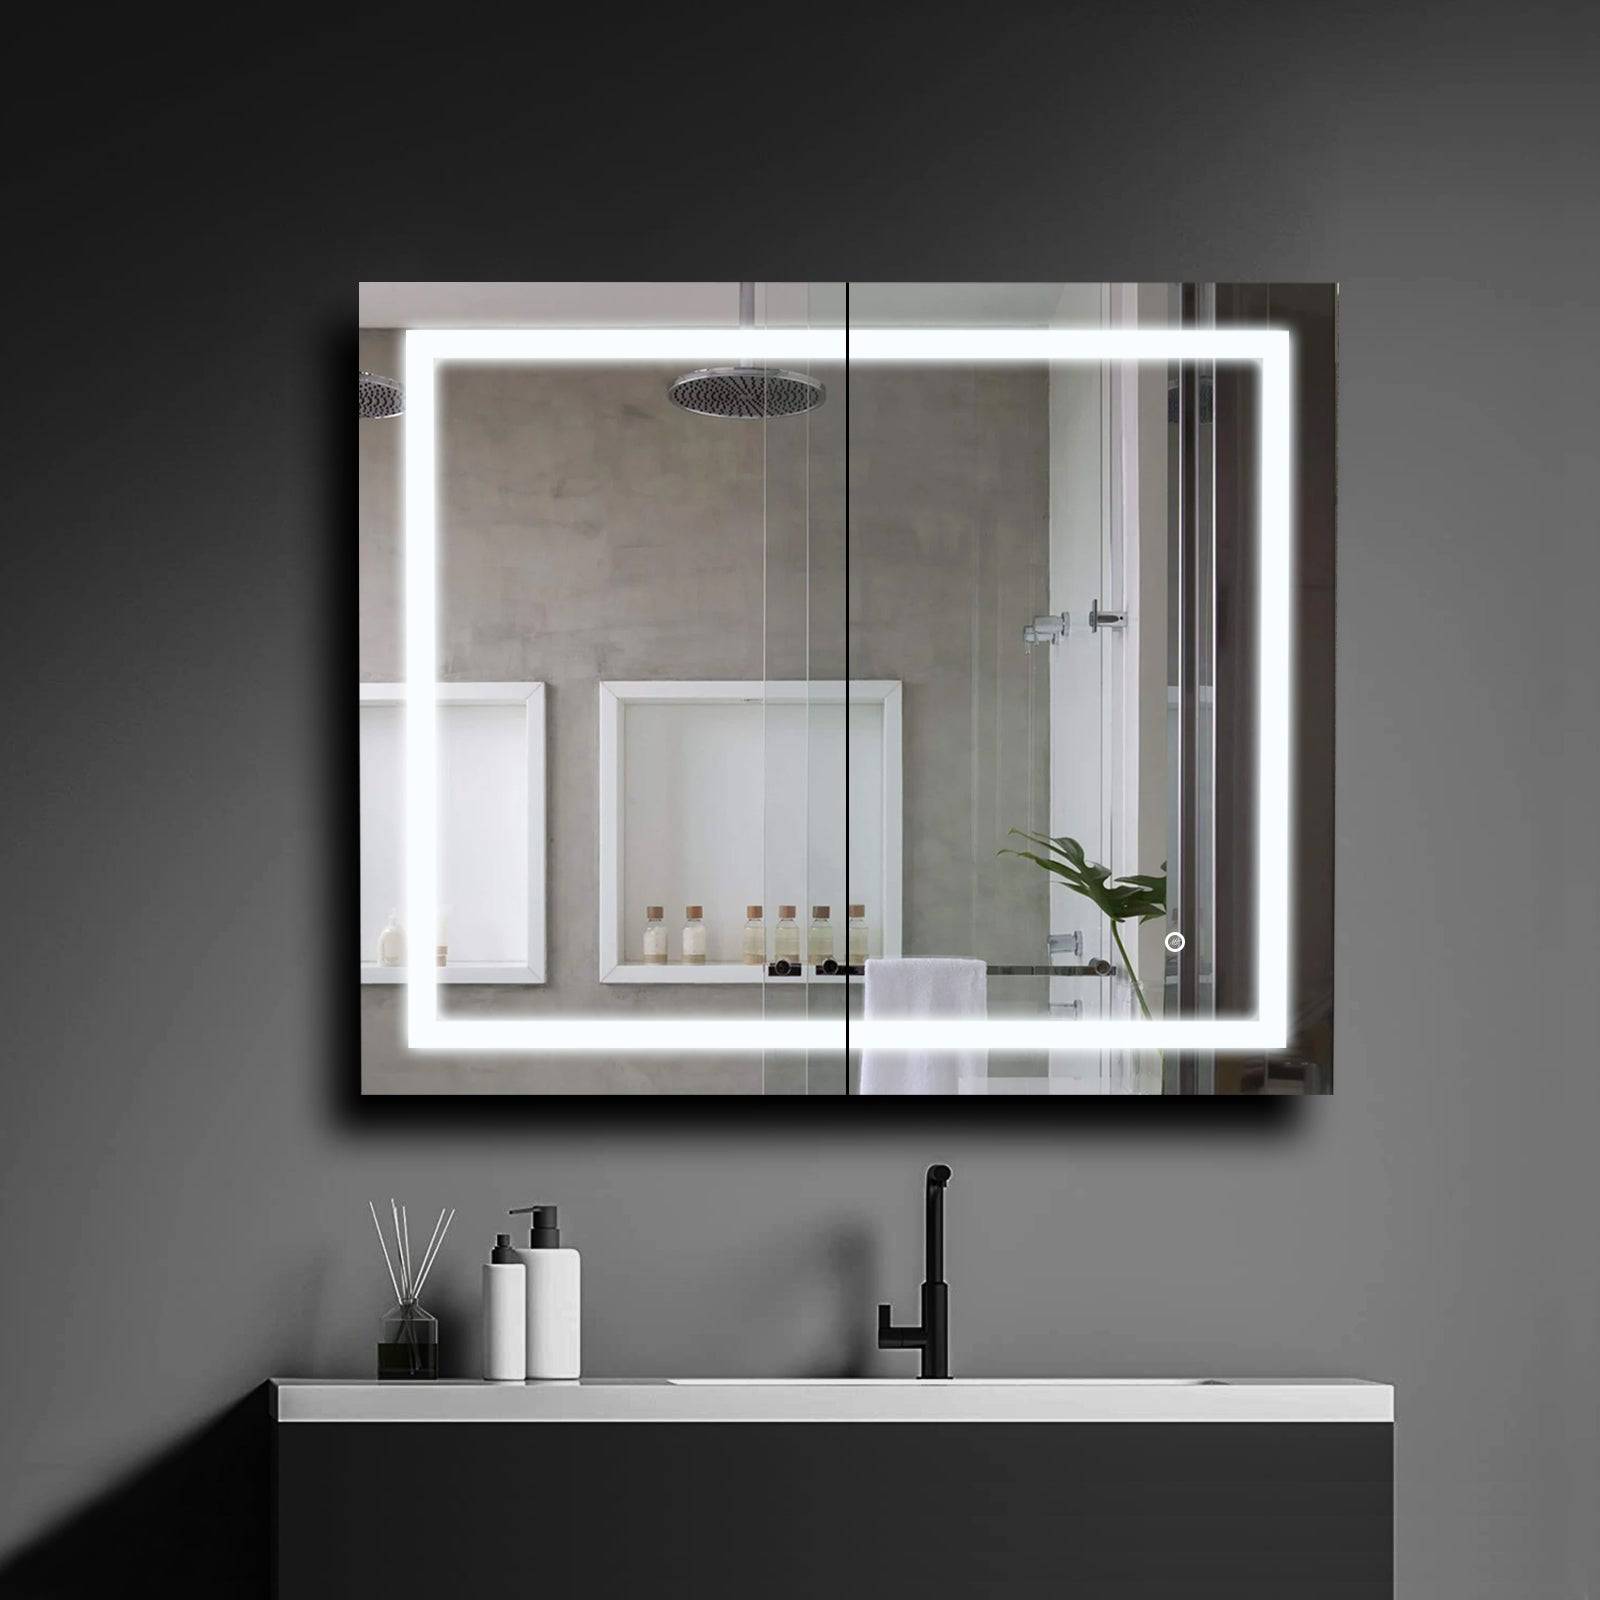 ELL Cubic Series- Double Door- Modern LED Bathroom Mirror with Defogger, Touch Switch, USB Charger, and Tempered Glass Shelves - Horizontal Mounting, Sleek Aluminum Carcass, Anodized Finish - Color Temperature Changing LED Lights - ETL Listed, IP44 Rated - Eco LED Lightings 